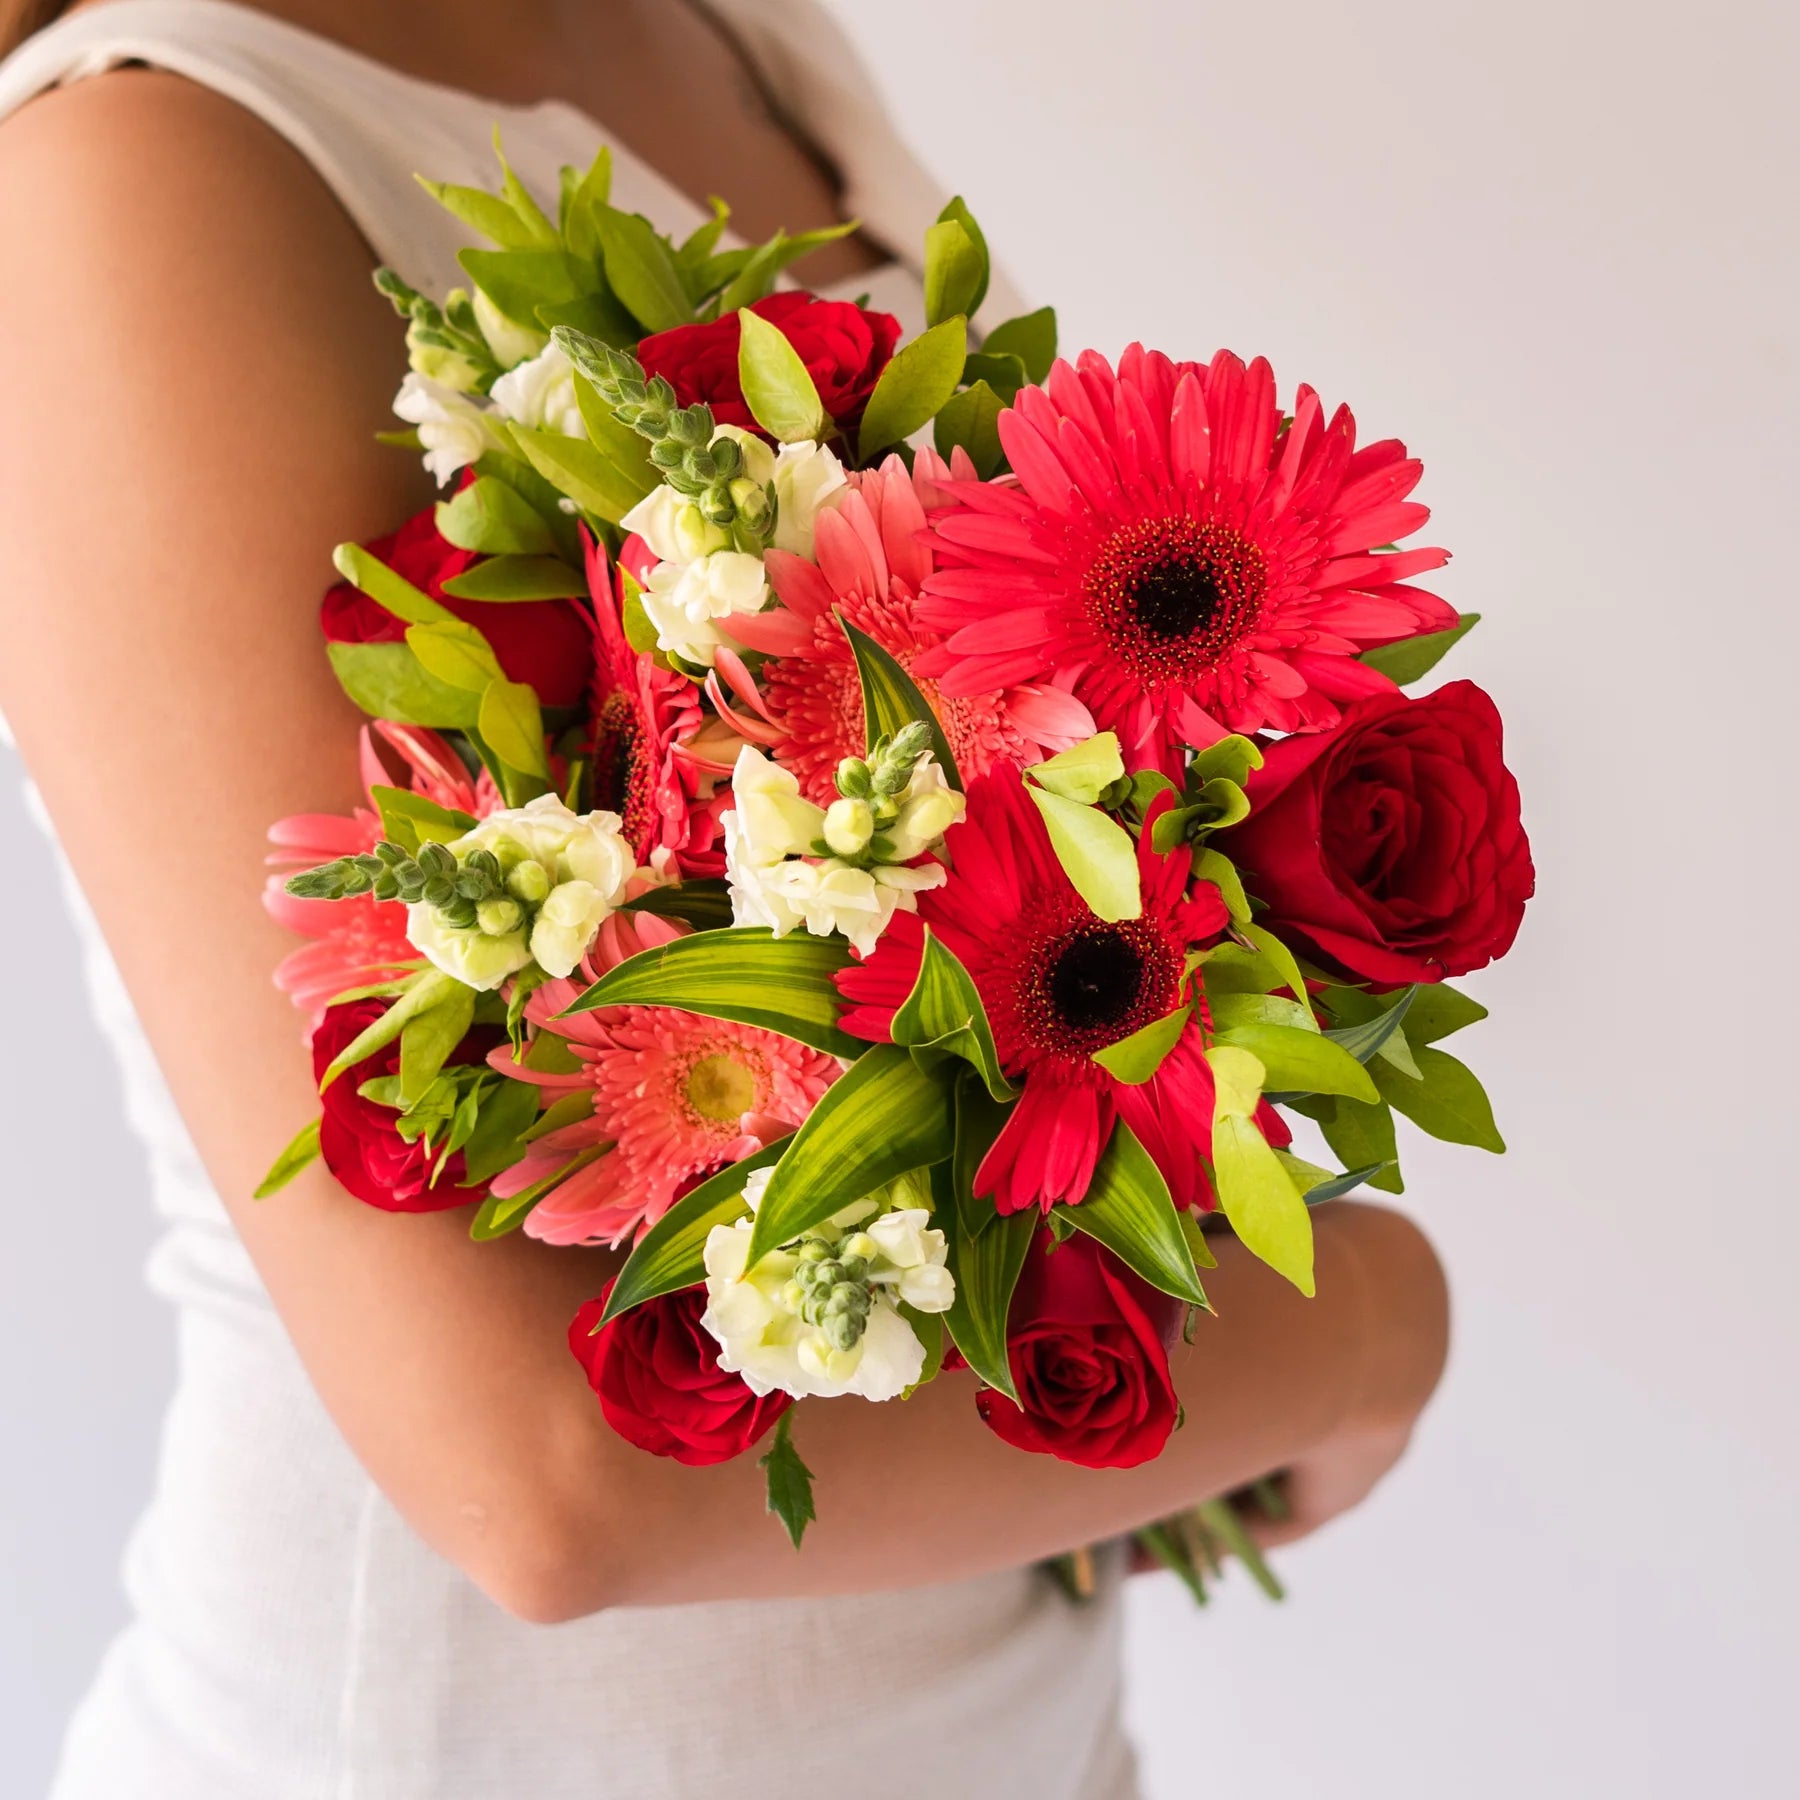 Say it with flowers - Flower delivery to Bangalore. Bouquet delivery to  India. Roses deliver to Bangalore. Birthday flowers gift. Send flowers to  Bangalore. For more info visit us at  http://sayitwithflowersbangalore.com/bizFloat ...